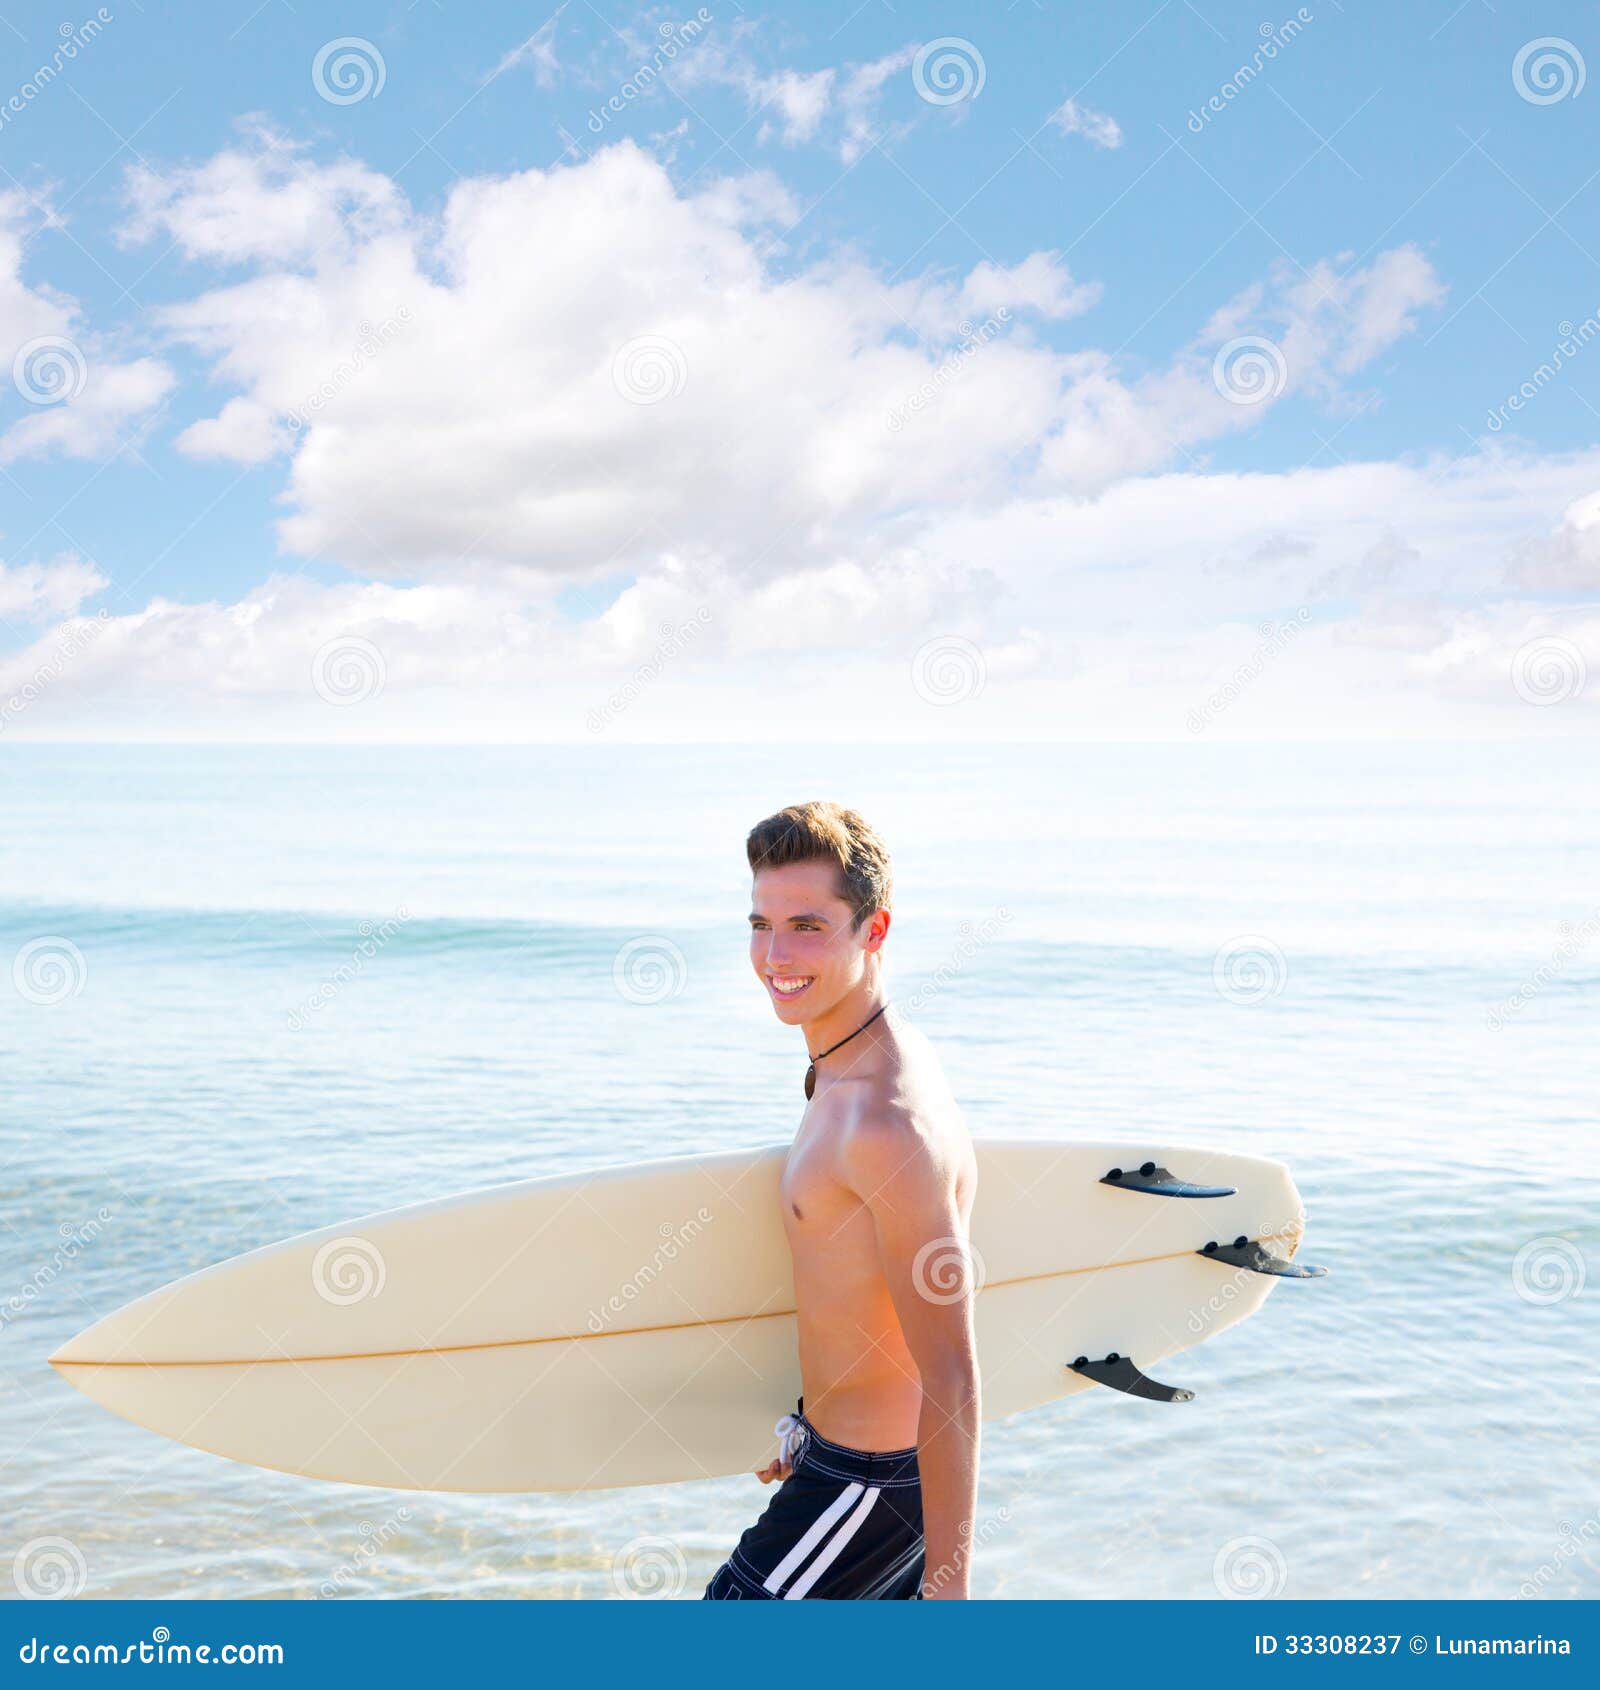 Surfer Boy Teenager With Surfboard In Beach Royalty Free Stock ...